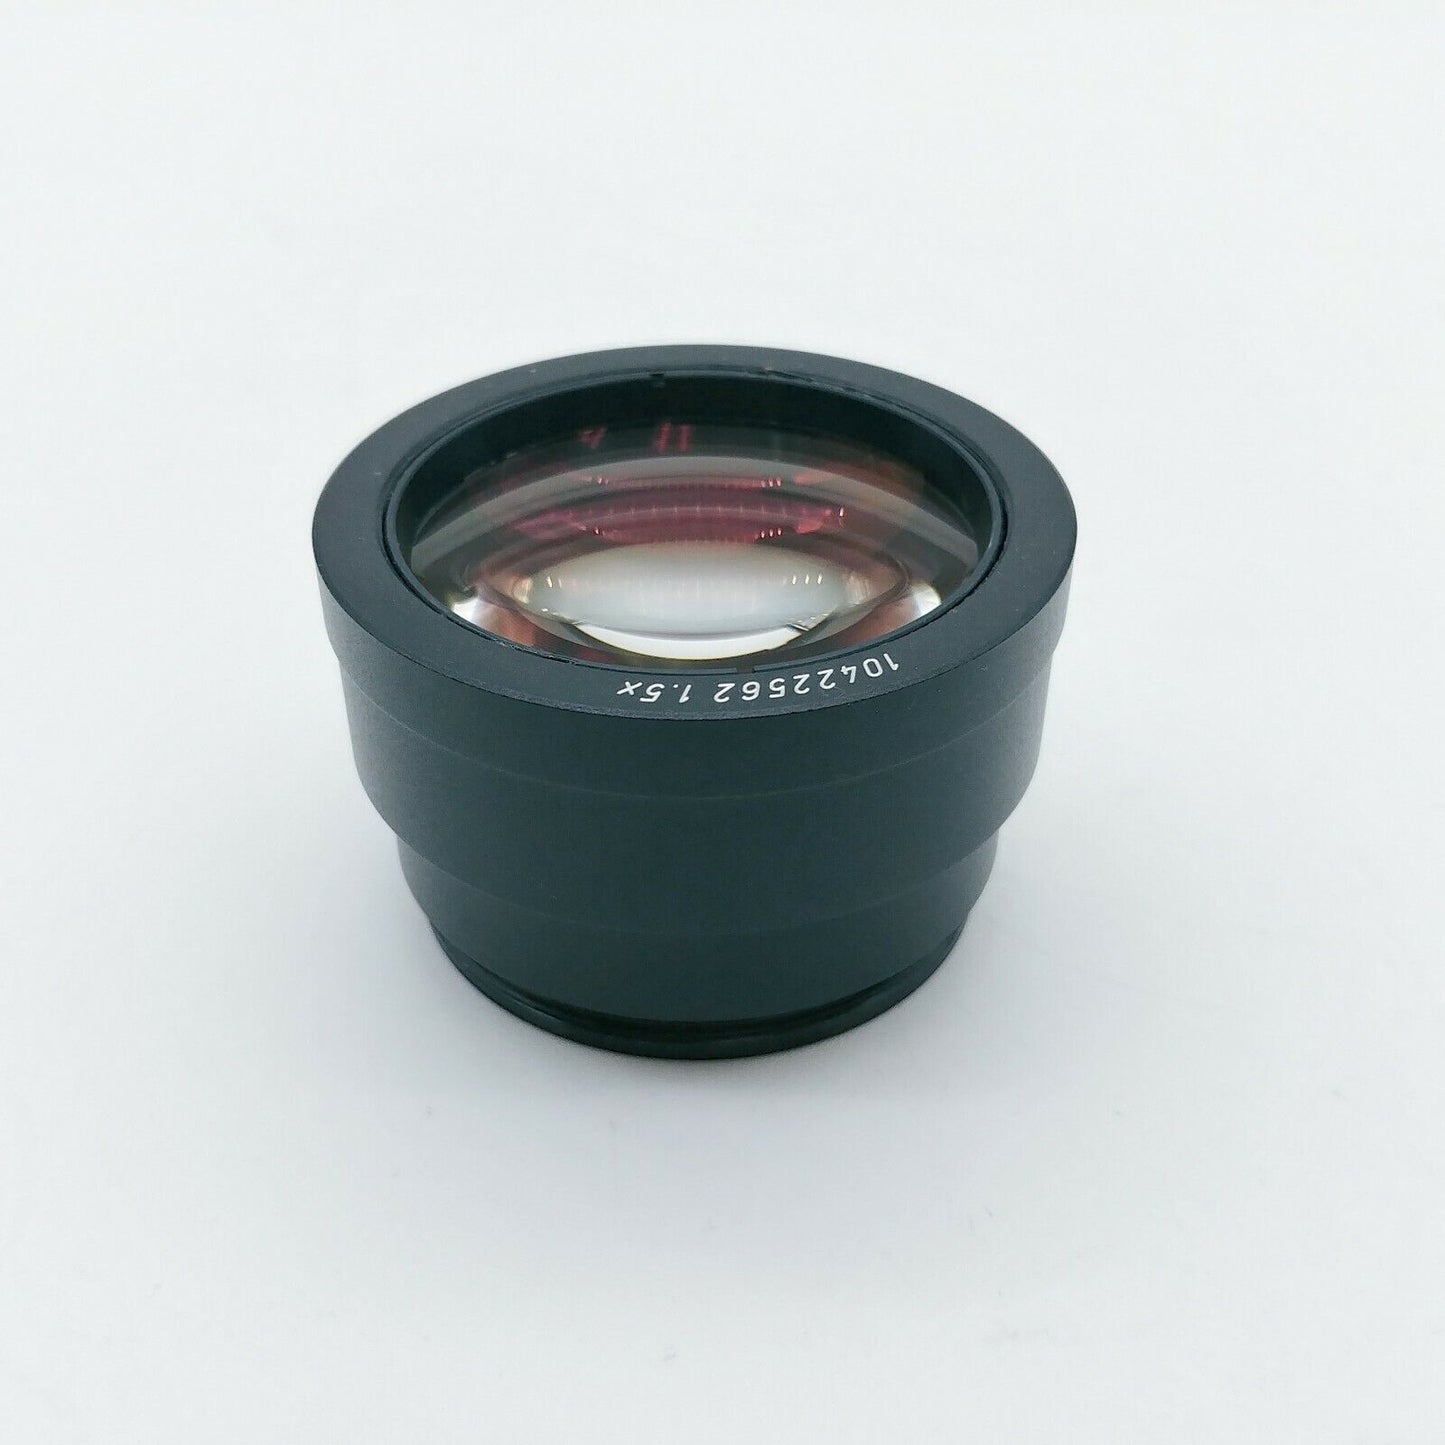 Leica Stereo Microscope Objective Lens 1.5x Article No. 10422562 MZ Series - microscopemarketplace